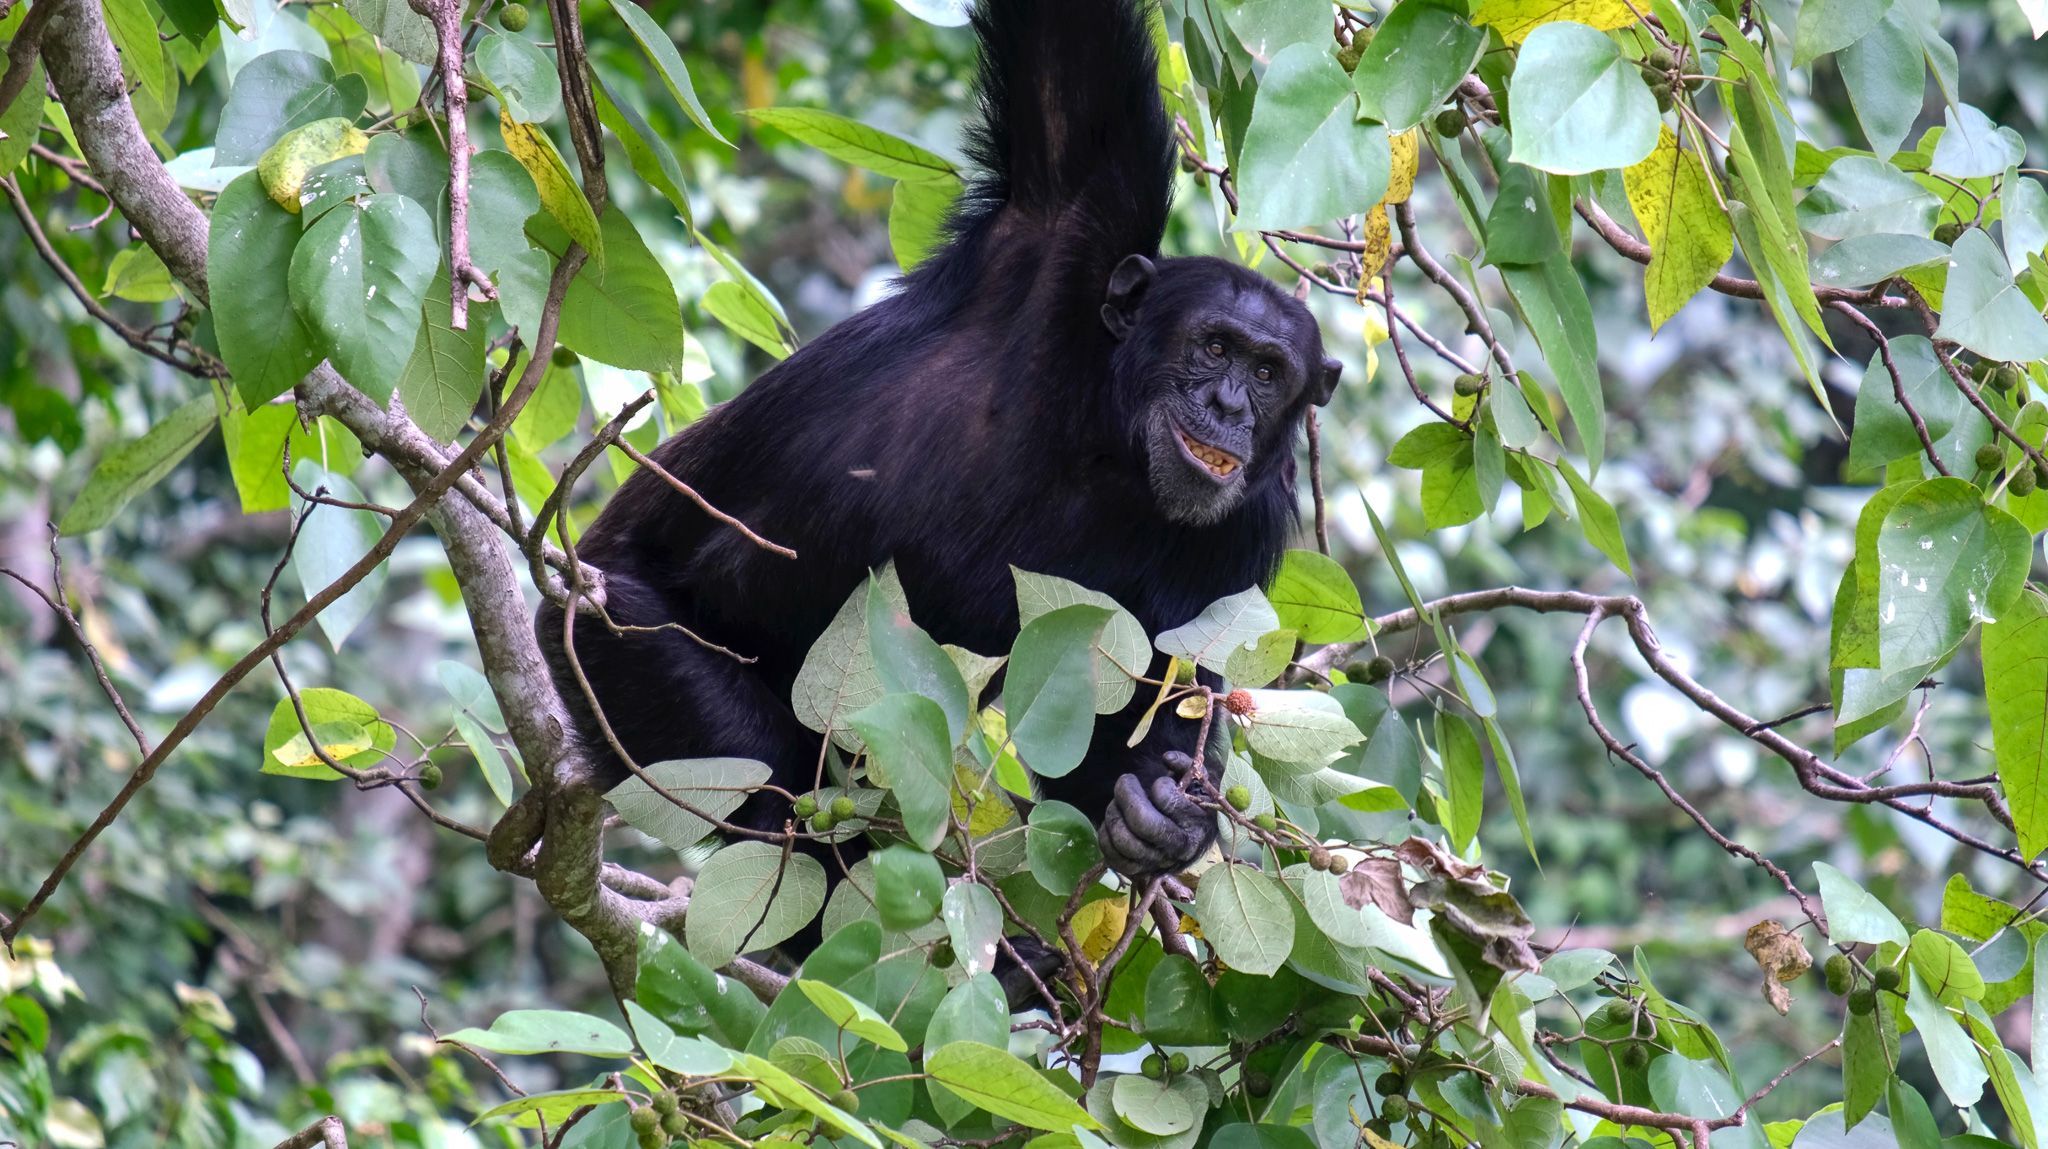 A chimpanzee sits in a tree in the forests of Uganda, eating fruit